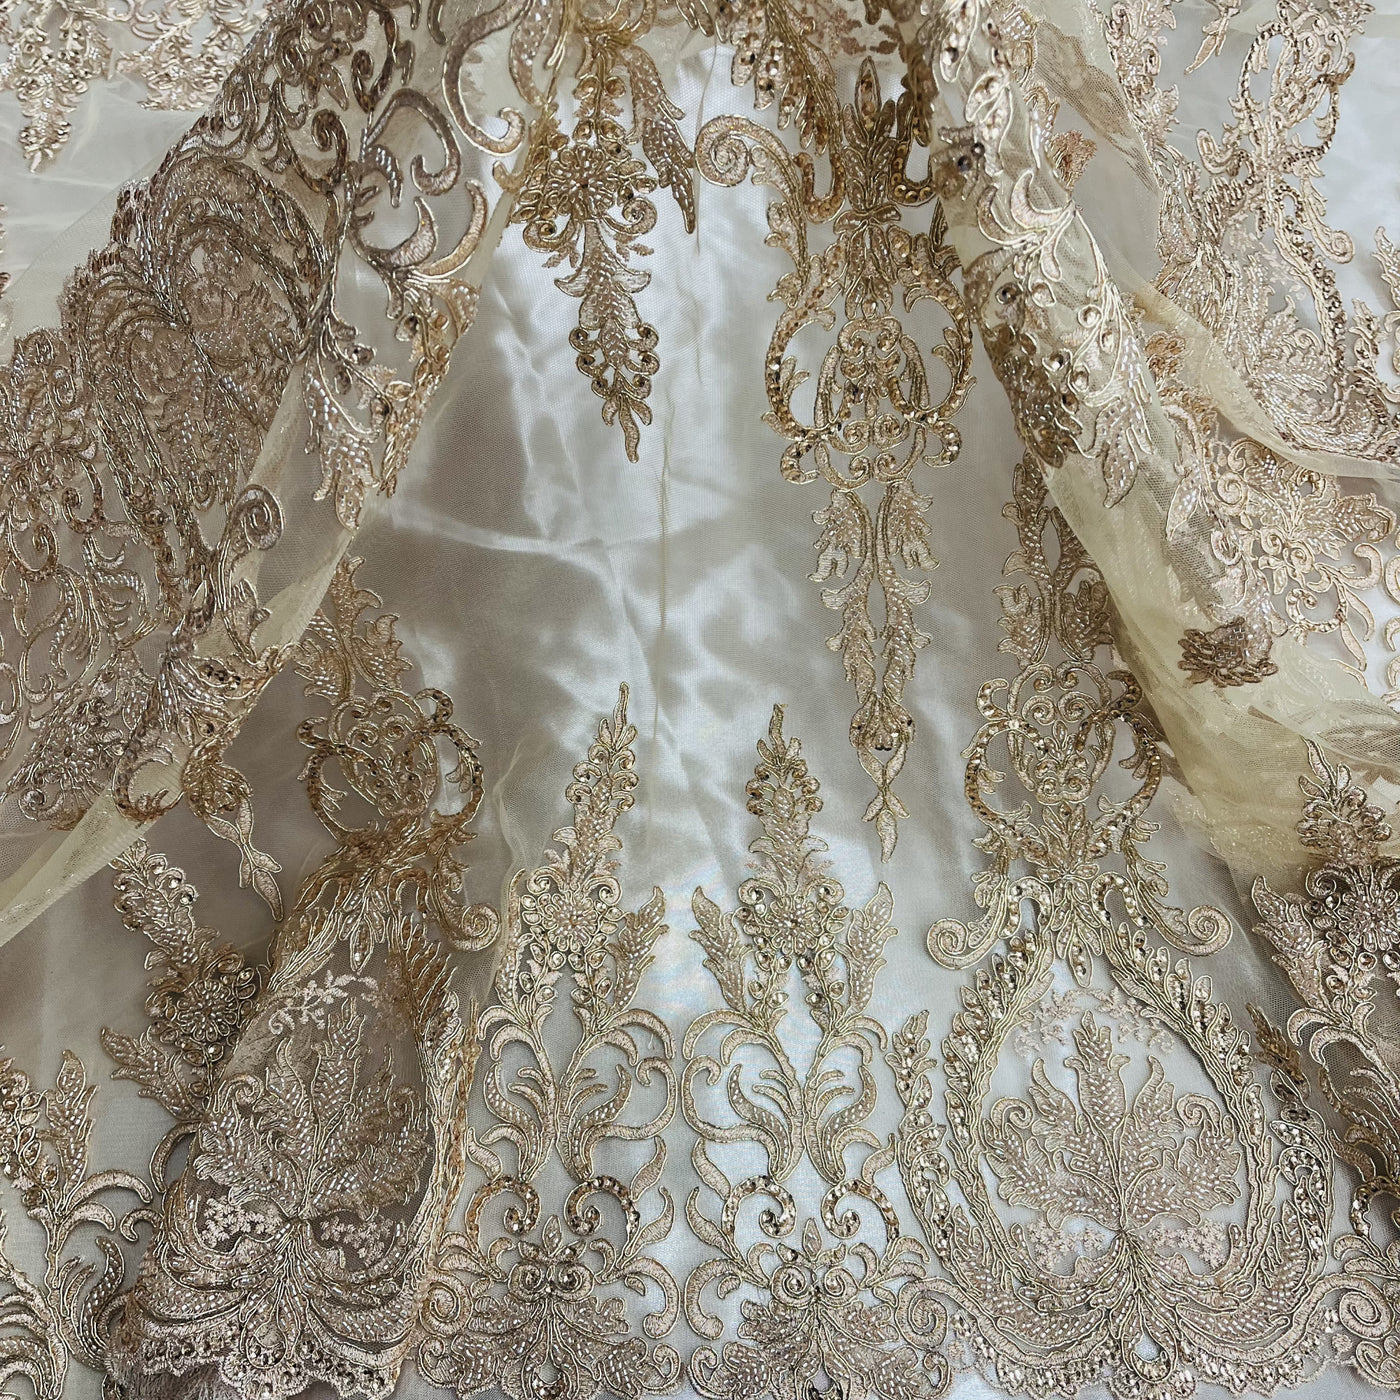 Beaded & Corded Bridal Lace Fabric Embroidered on 100% Polyester Net Mesh | Lace USA - 97201W-HB